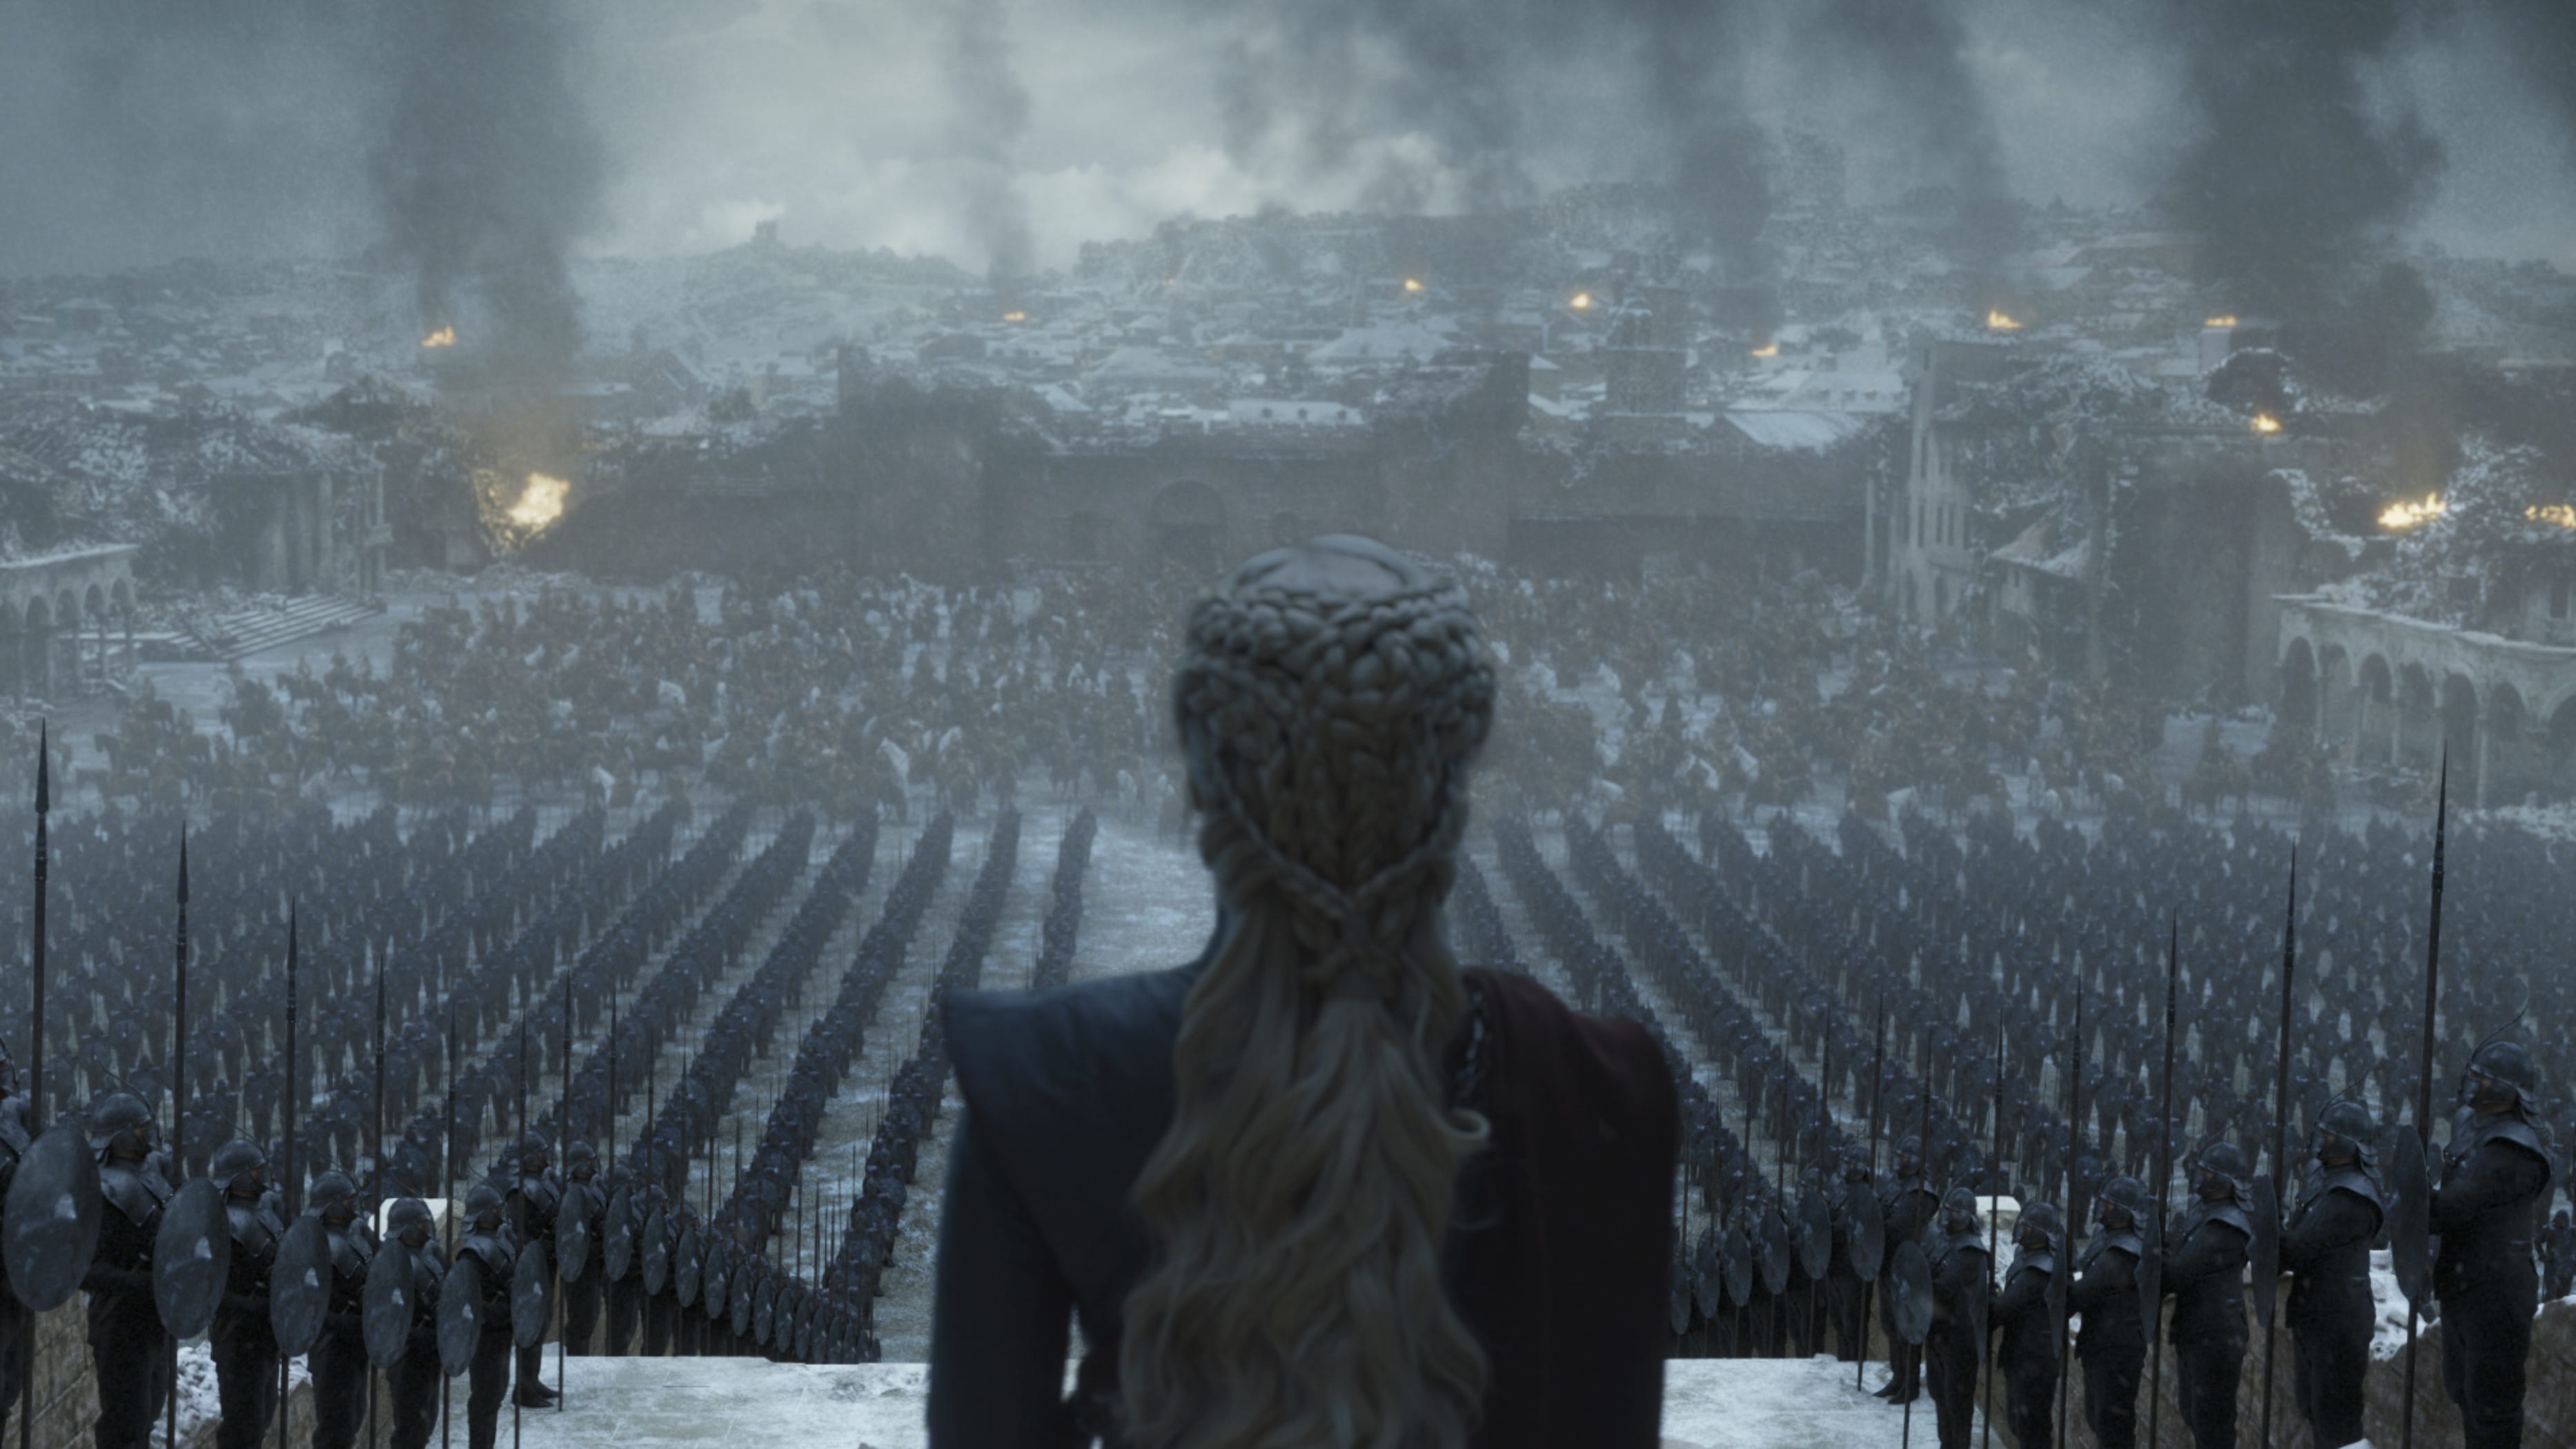 Daenerys Targaryen Queen Of The Ashes In The Iron Throne Wallpapers